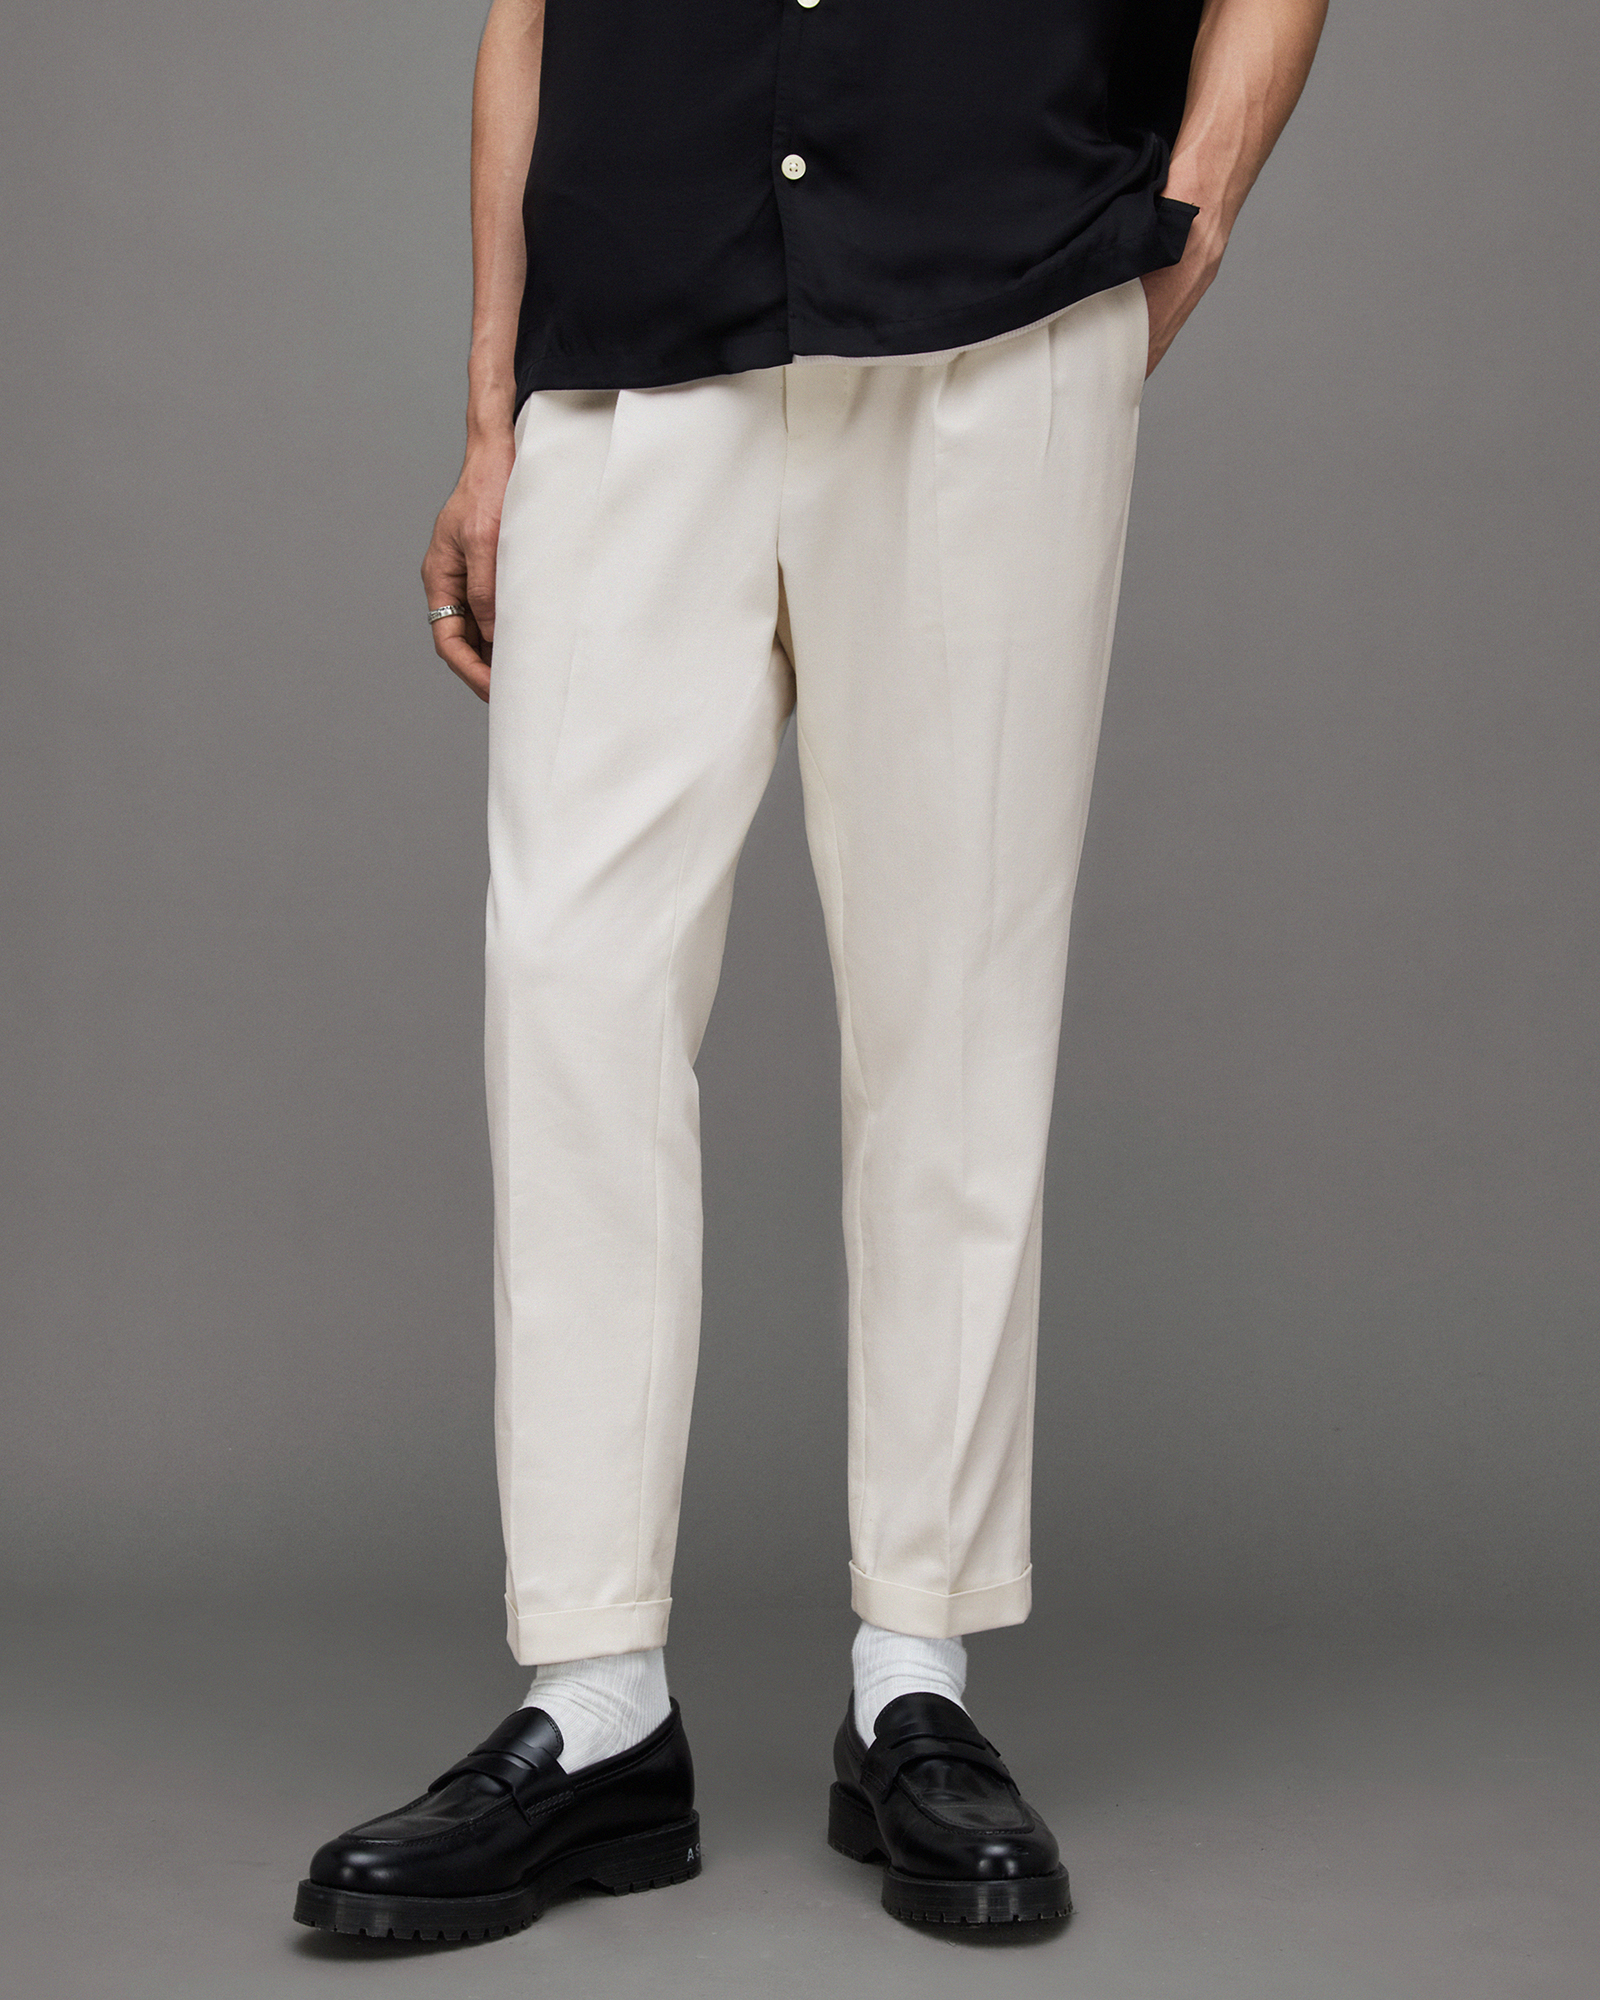 AllSaints Tallis Slim Fit Cropped Trousers,, WHEATGRASS TAUPE